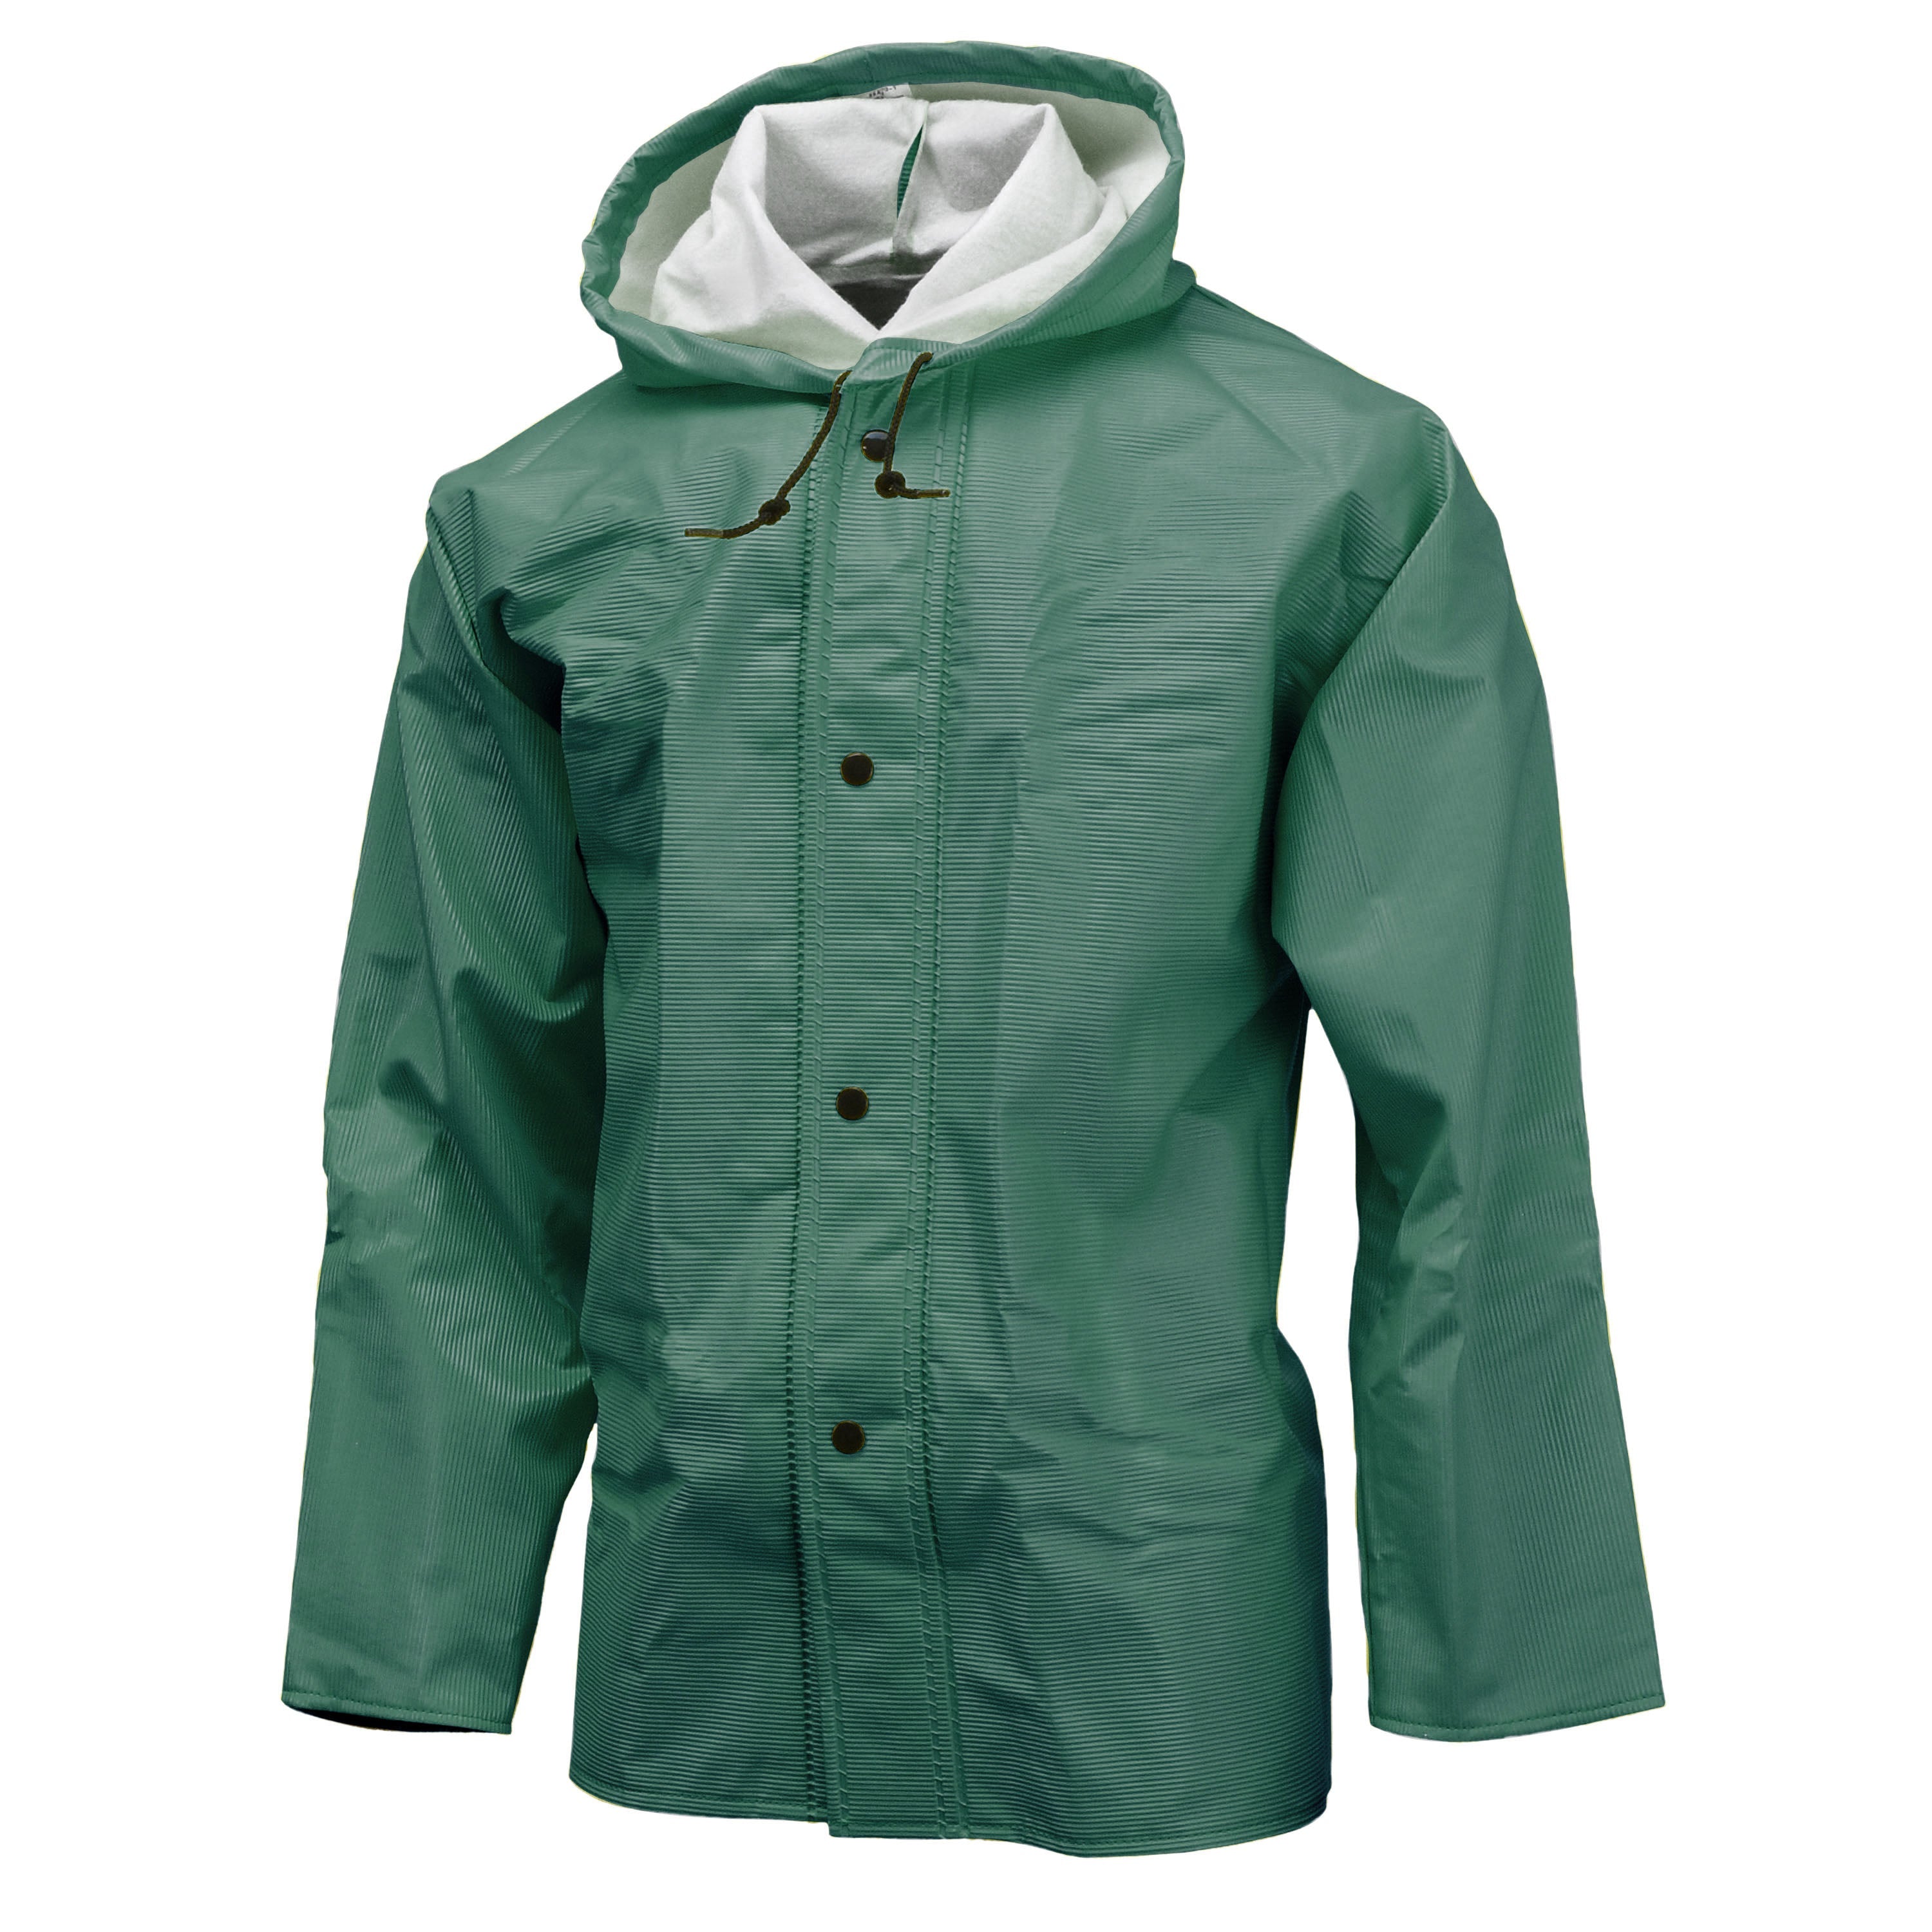 Neese 56AJ Dura Quilt Jacket with Hood